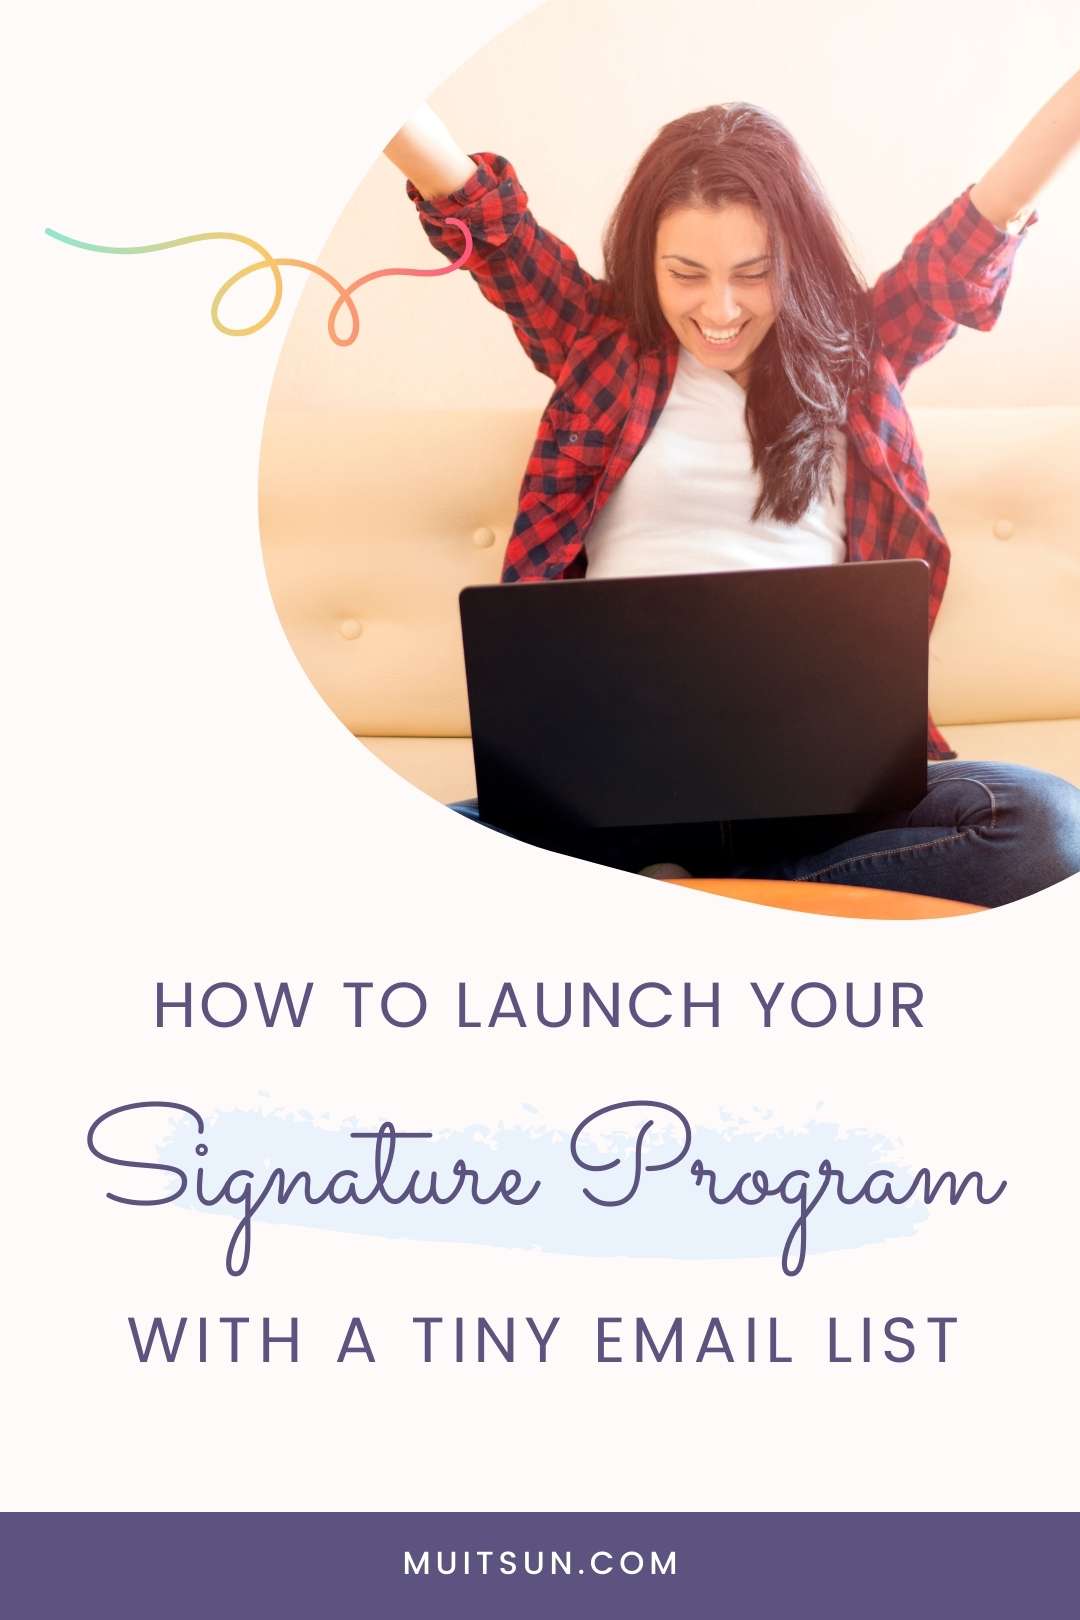 How To Launch Your Signature Program With A Tiny Email List